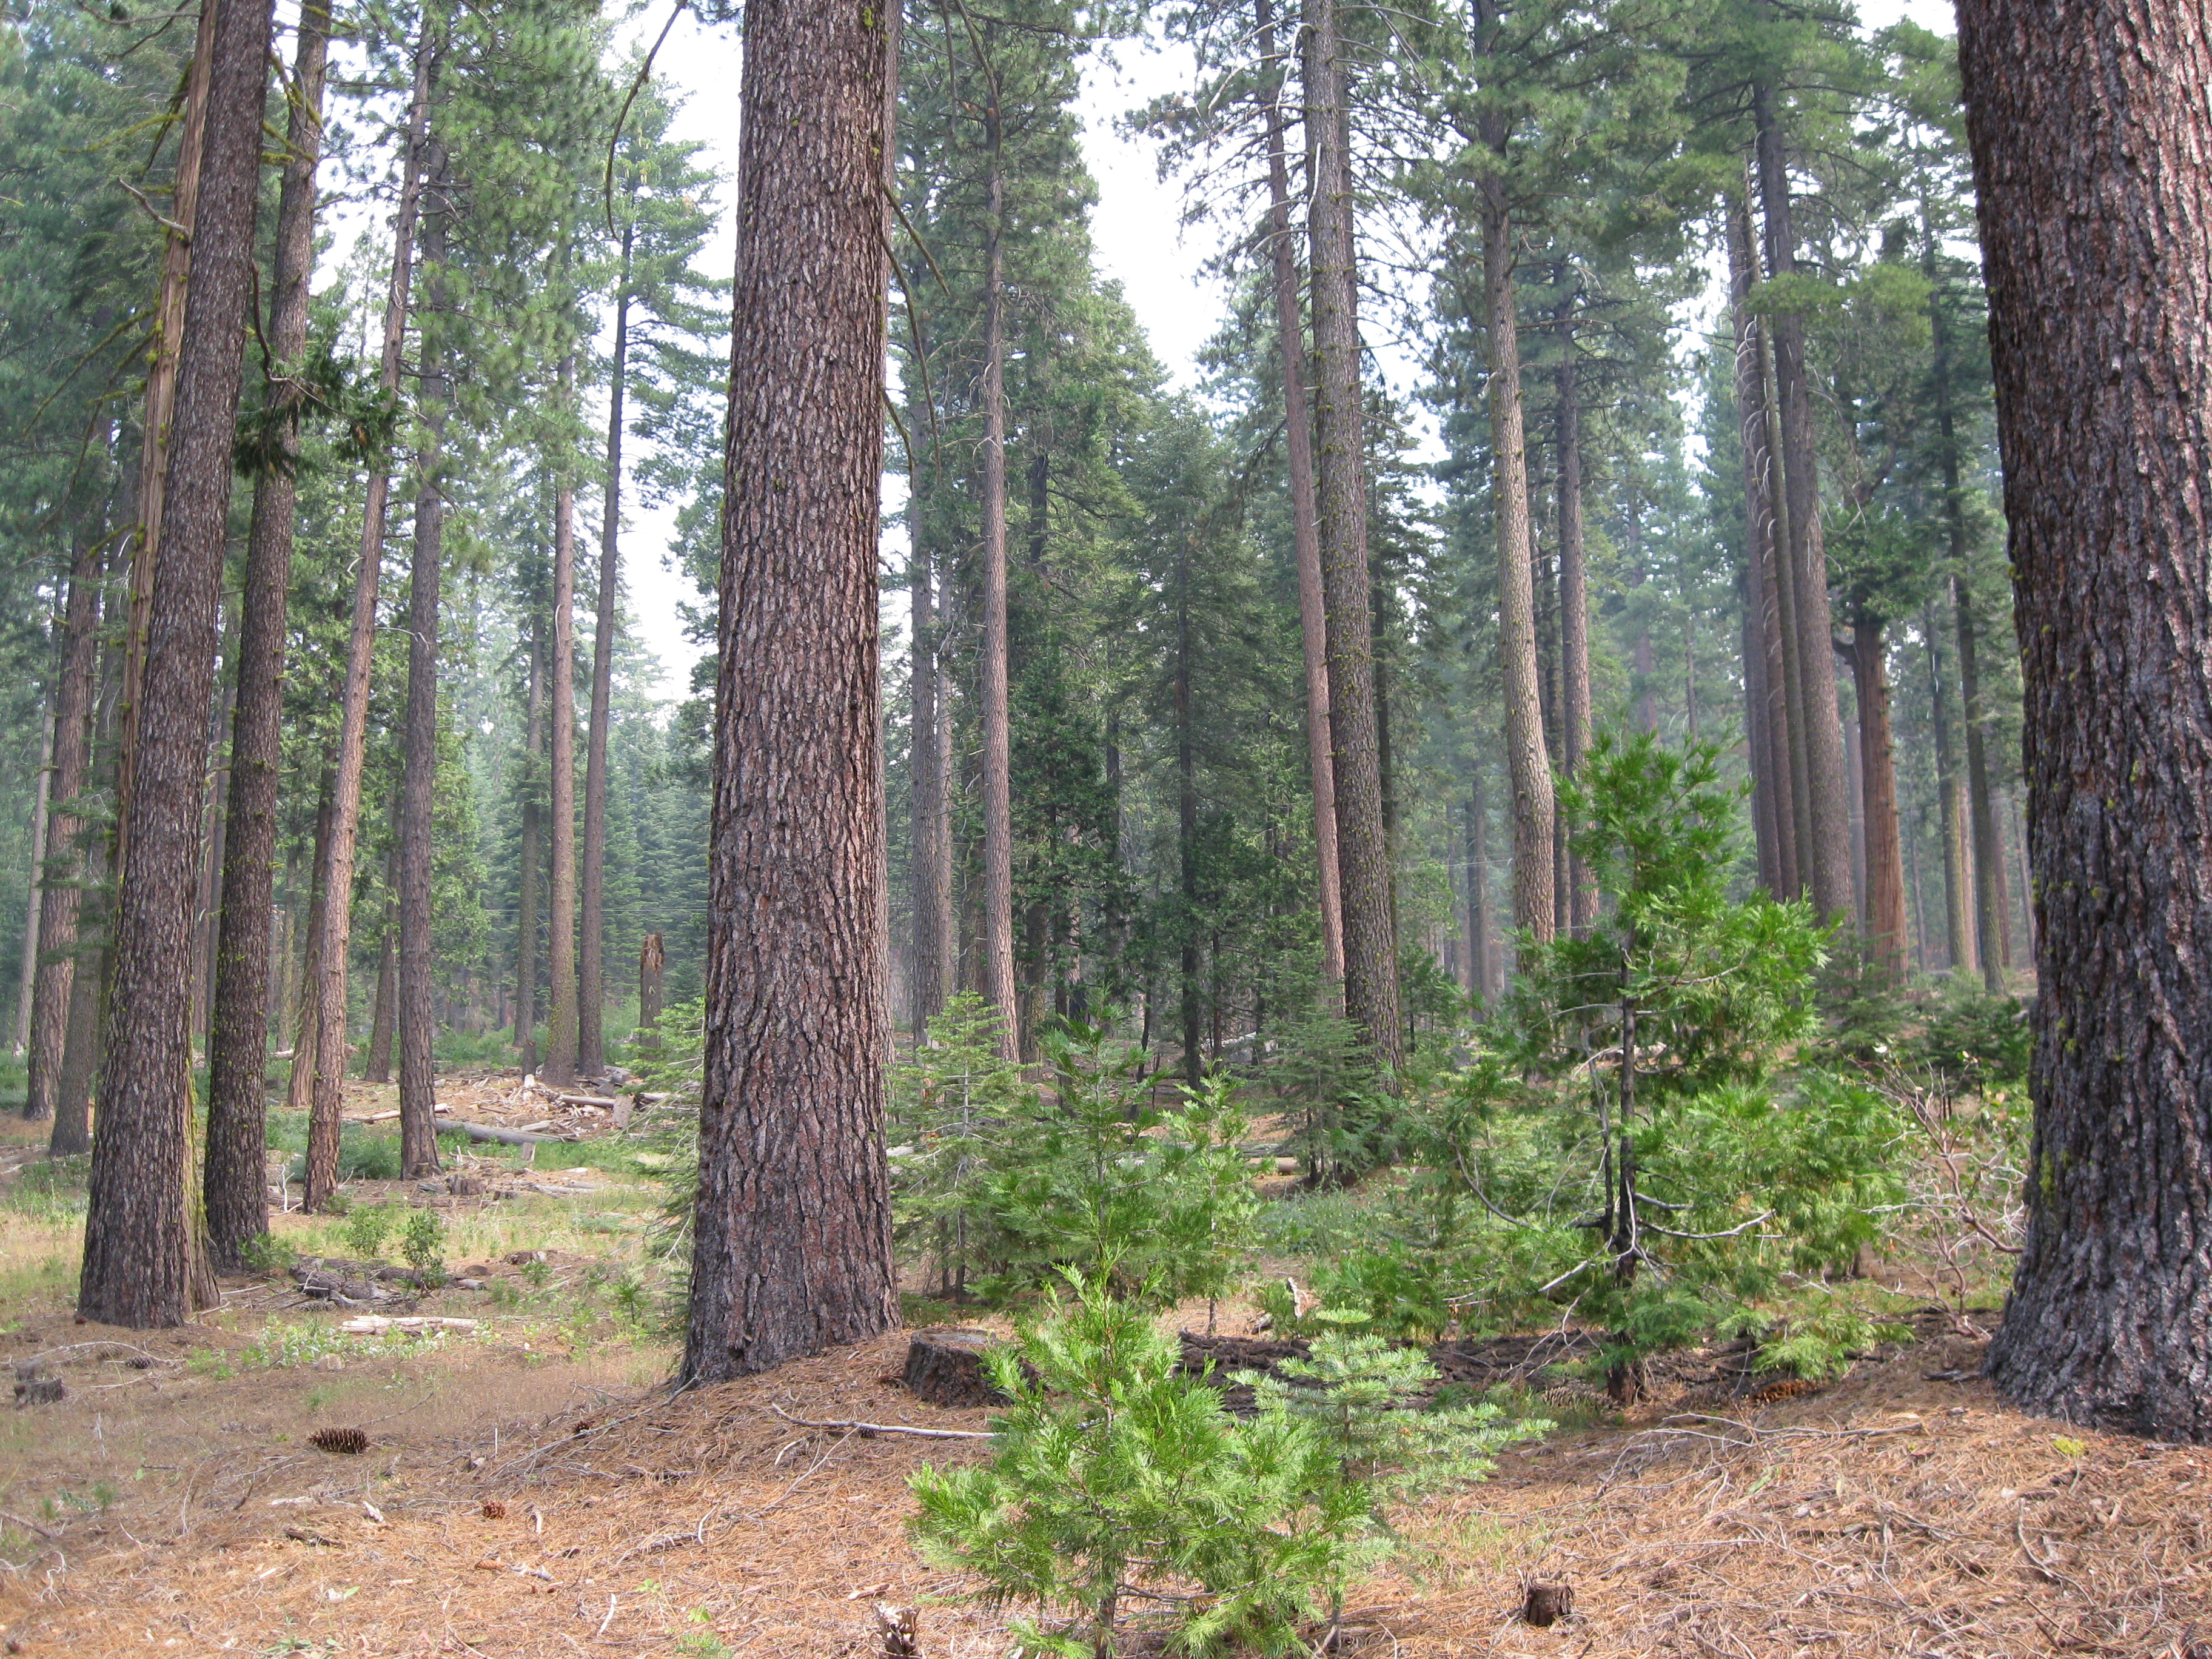 A close up of trees in Central Sierra.